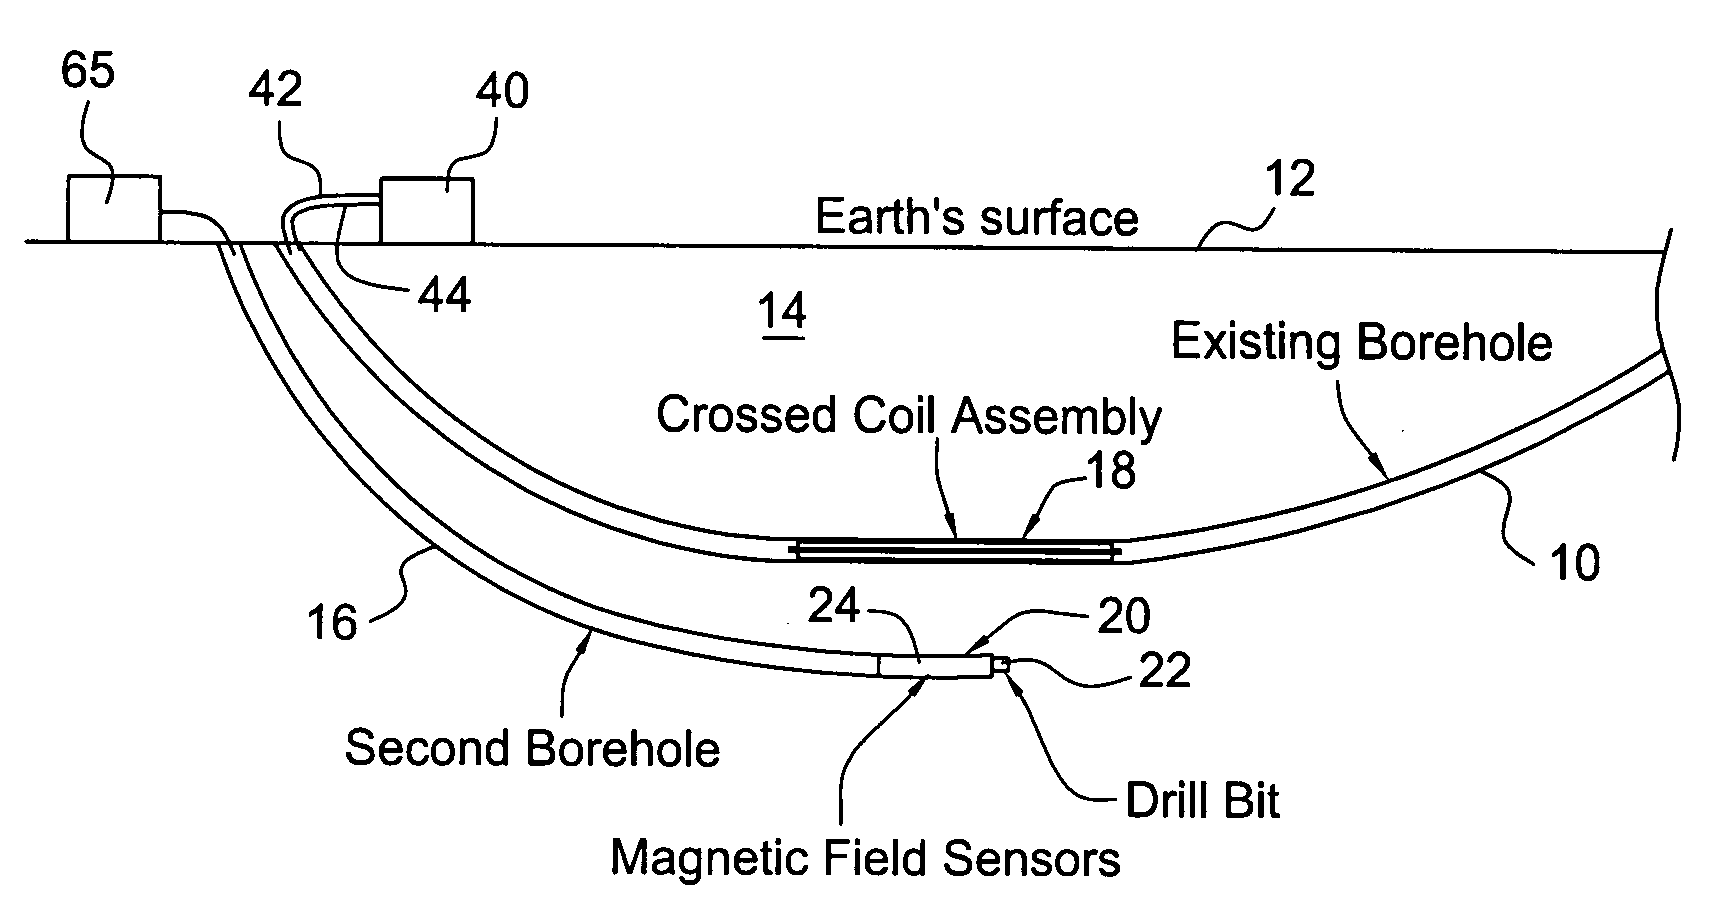 Elongated cross coil assembly for use in borehole location determination